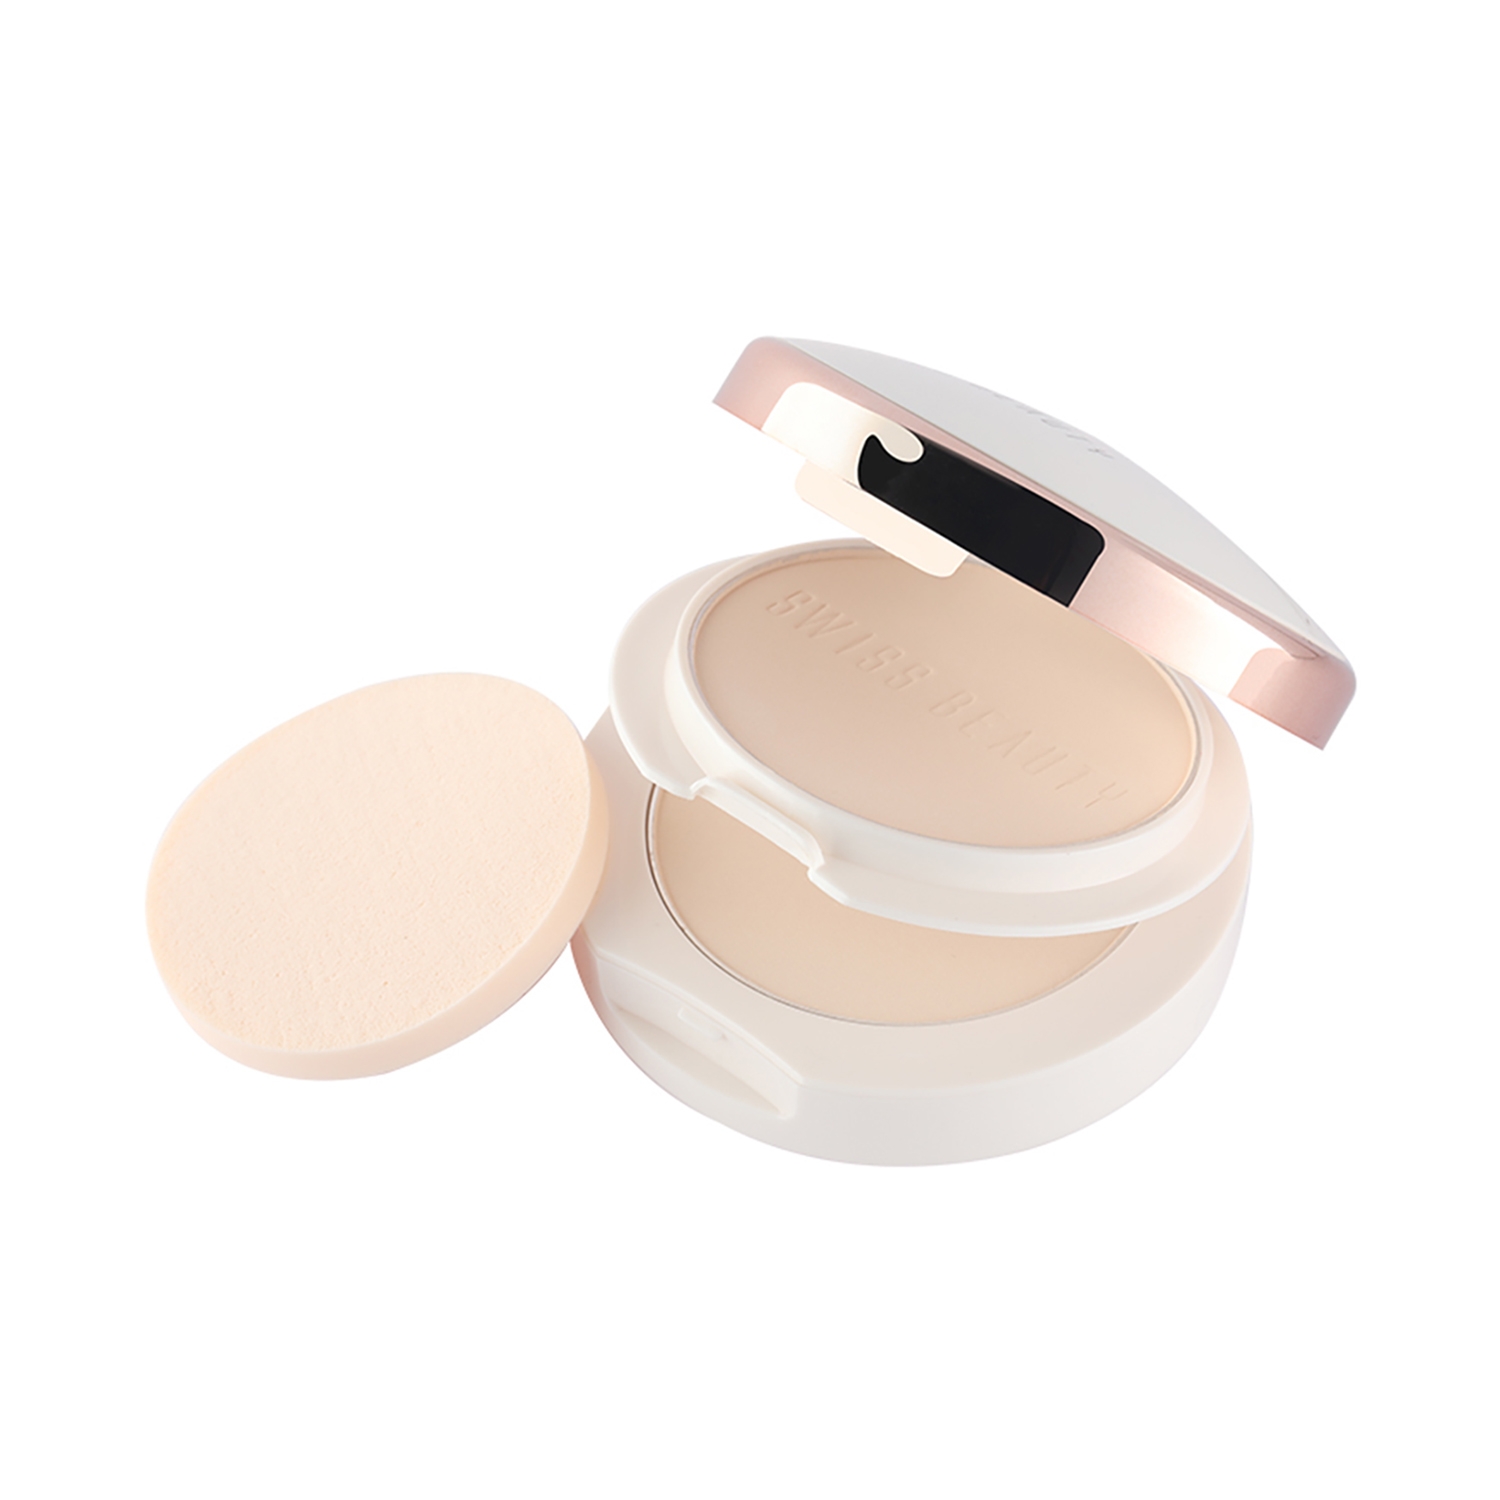 Swiss Beauty | Swiss Beauty Oil Control Compact Powder - Pearly Ivory (20g)